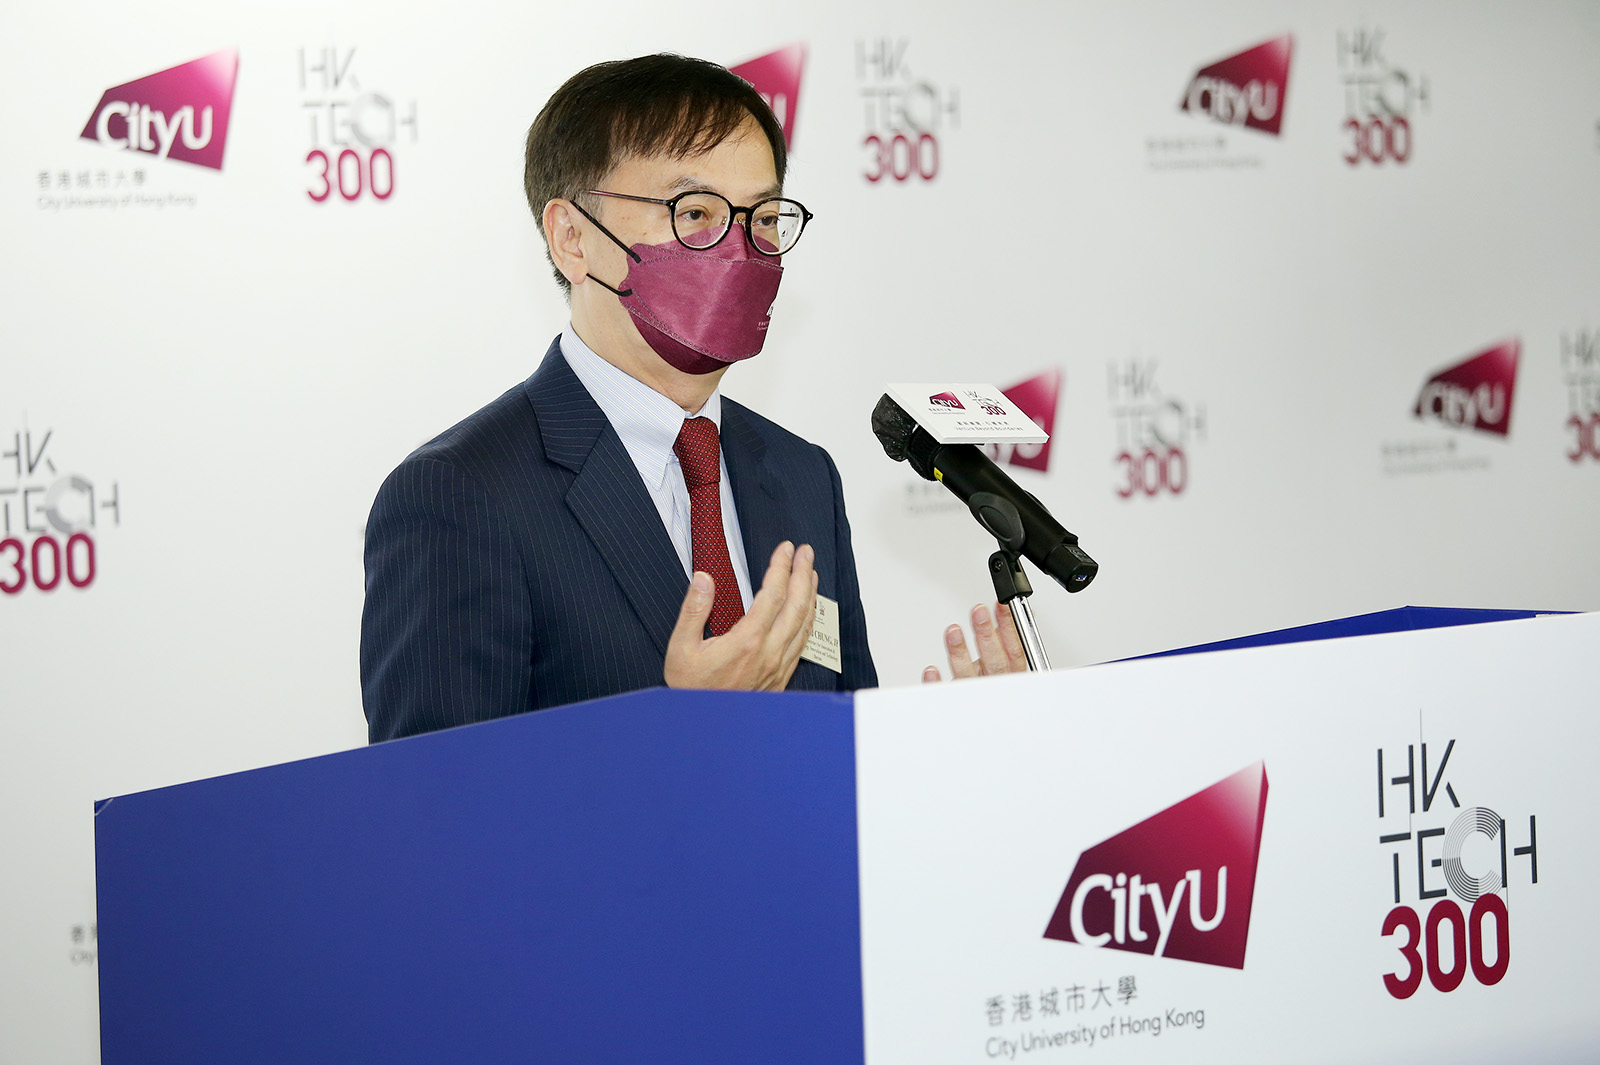 Photo caption: Dr David Chung Wai-keung, Under Secretary for Innovation and Technology, witnessed the MoU signing. He praised HK Tech 300, which has received an enthusiastic response since its launch and recorded fruitful results in just one year, making it a driving force behind the innovation and technology ecosystem in Hong Kong.